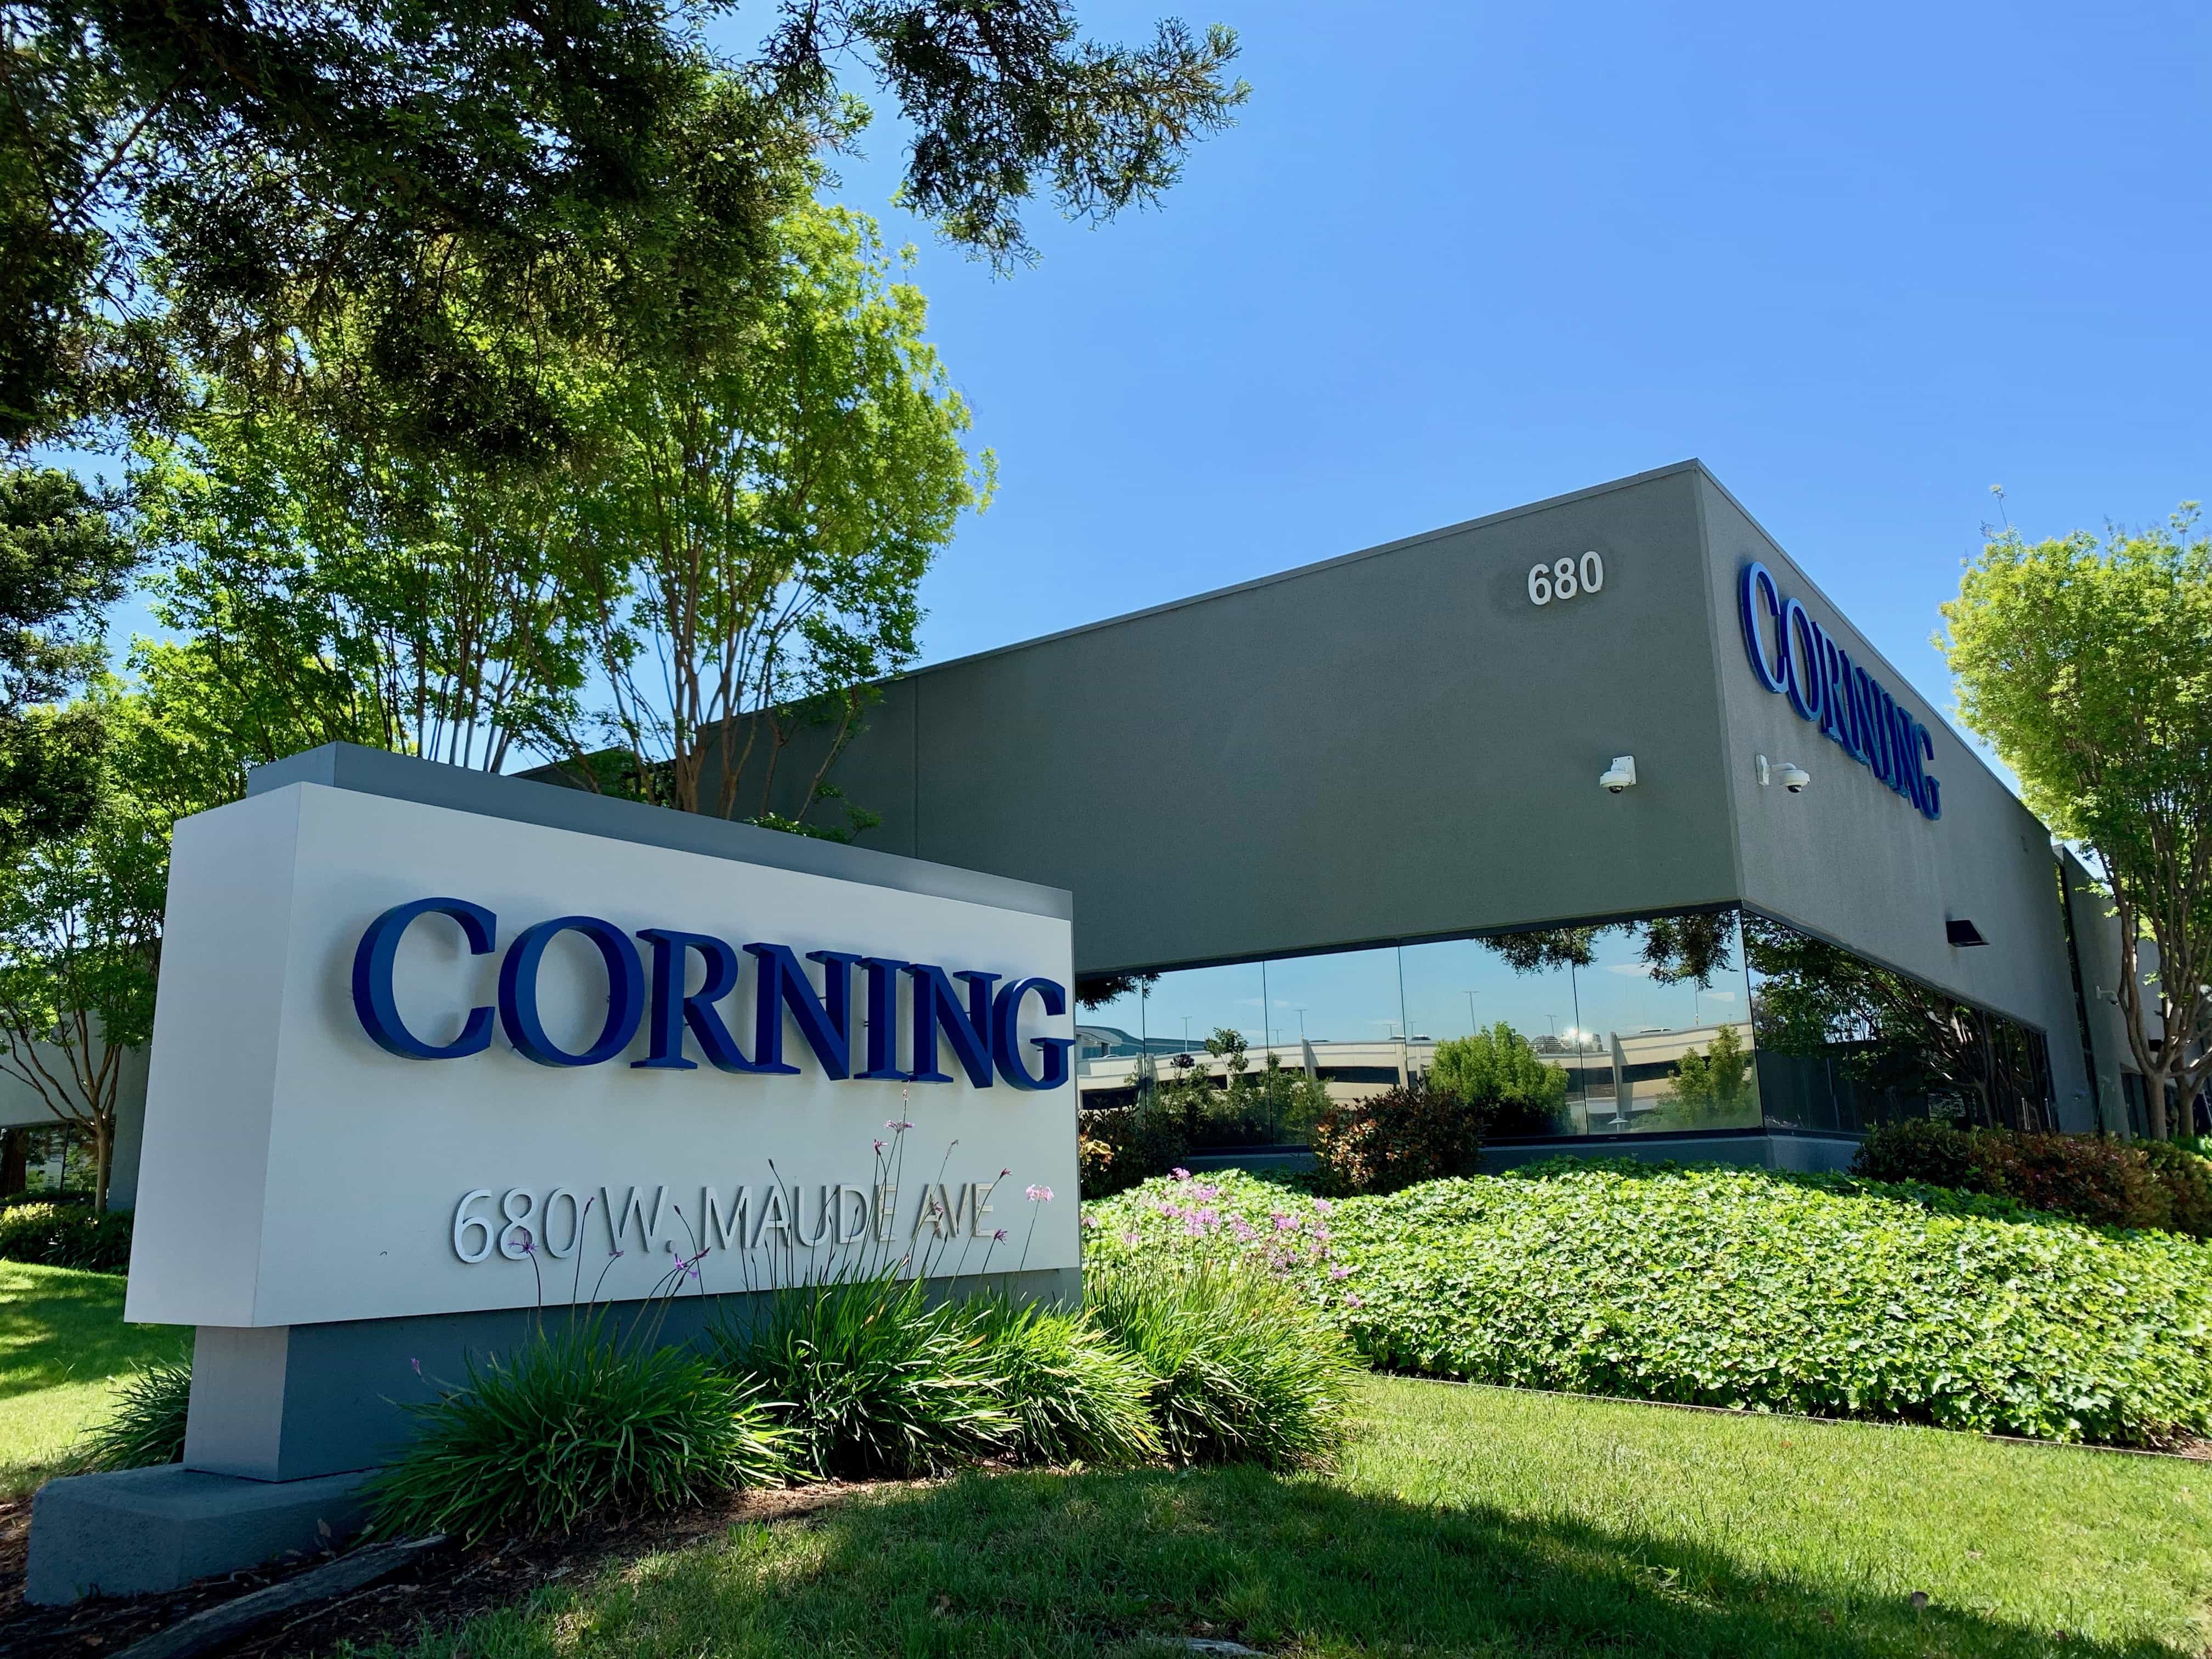 Corning's Silicon Valley research center